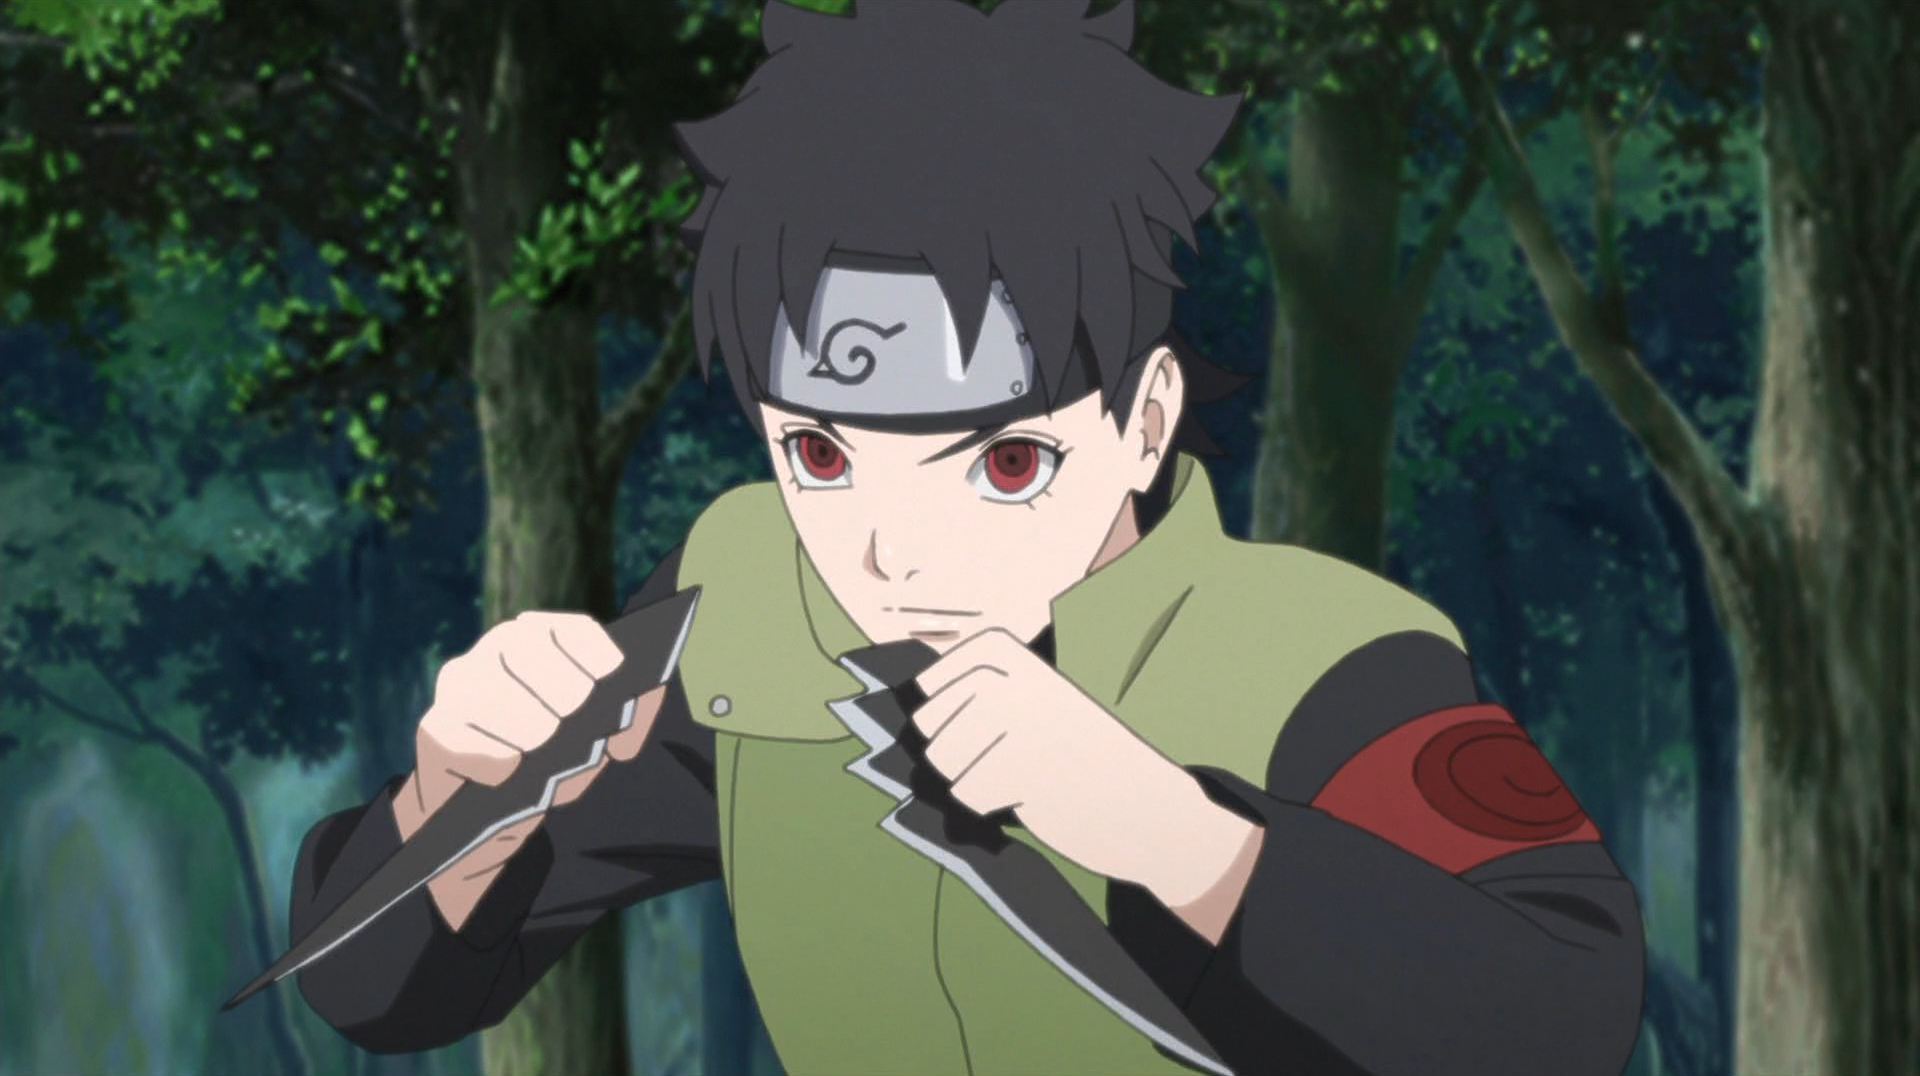 Name A Good Anime Character With Black Hair And Red Eyes